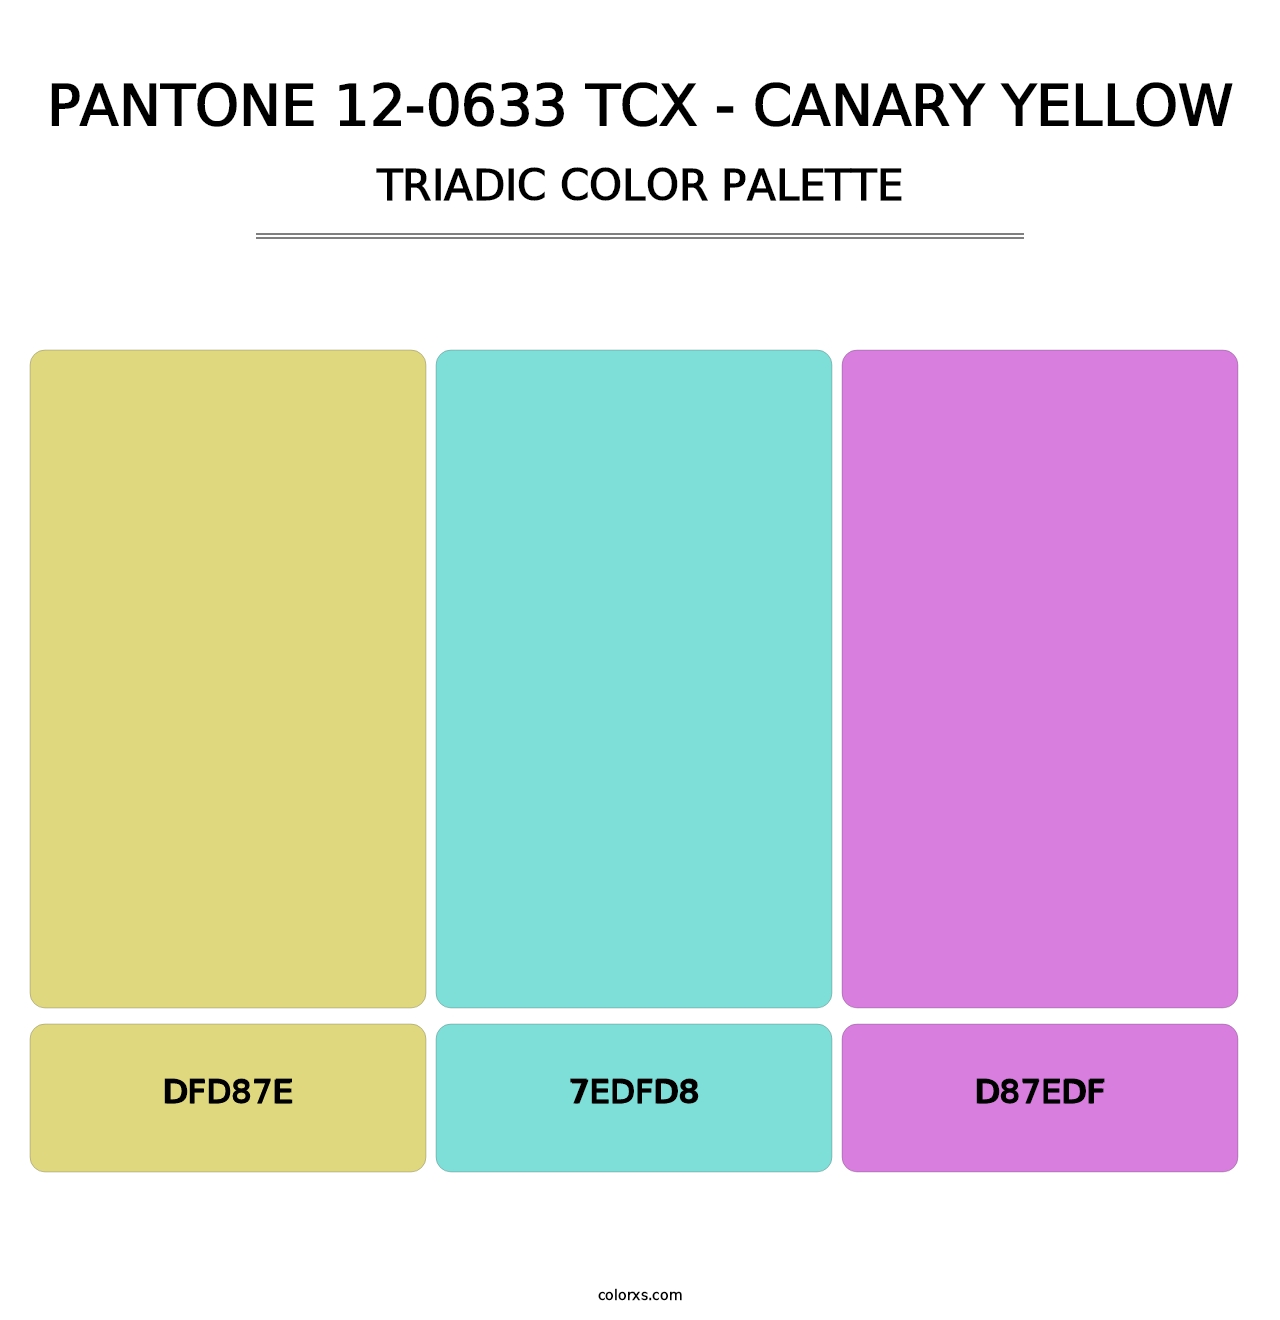 PANTONE 12-0633 TCX - Canary Yellow - Triadic Color Palette